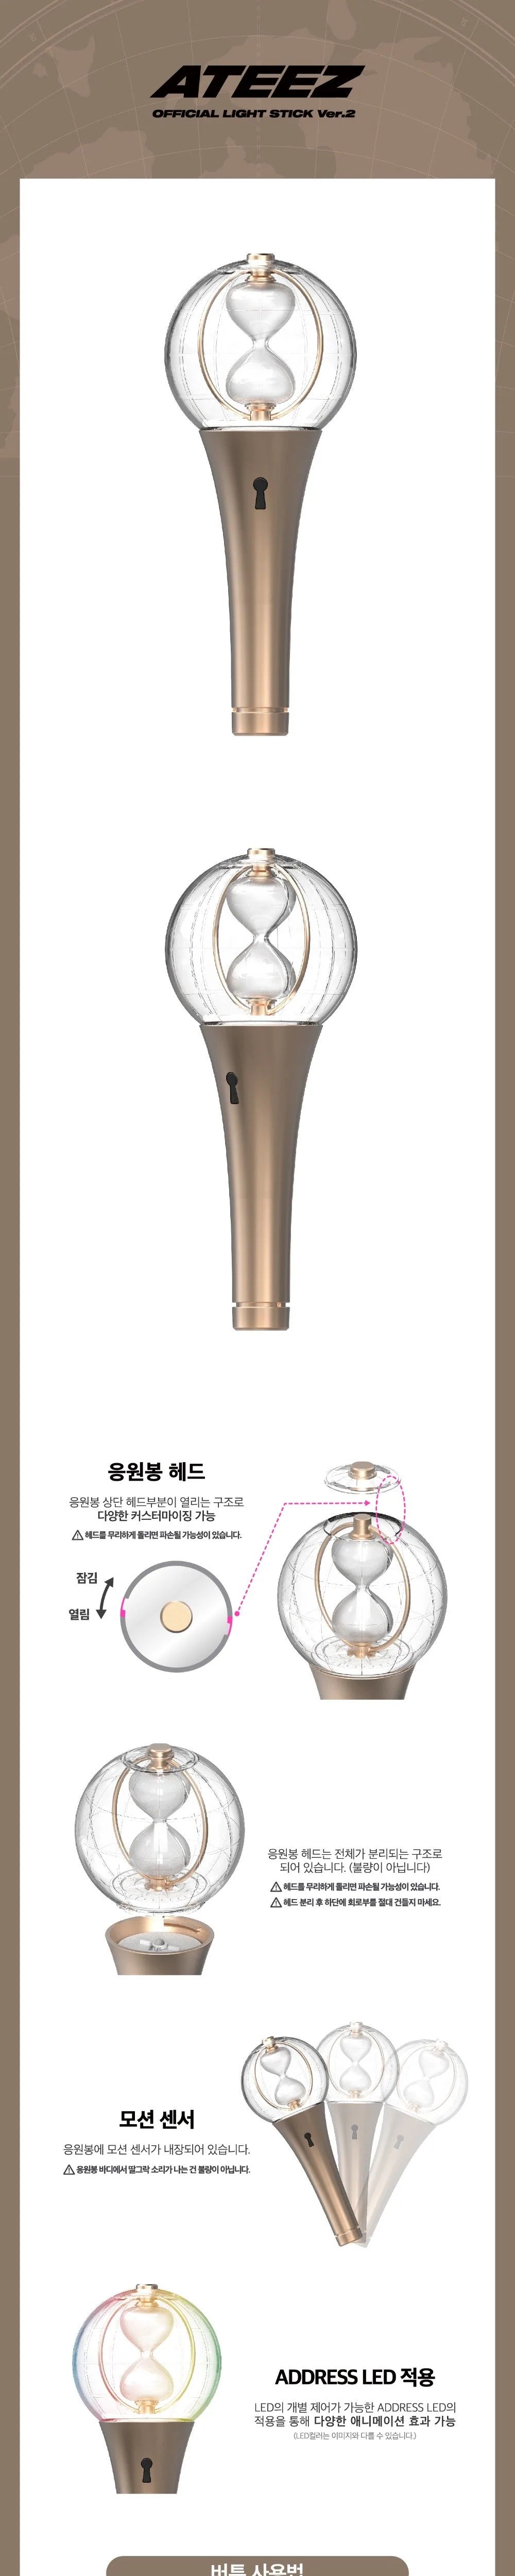 ATEEZ - OFFICIAL LIGHT STICK VER.2 Infographic 1